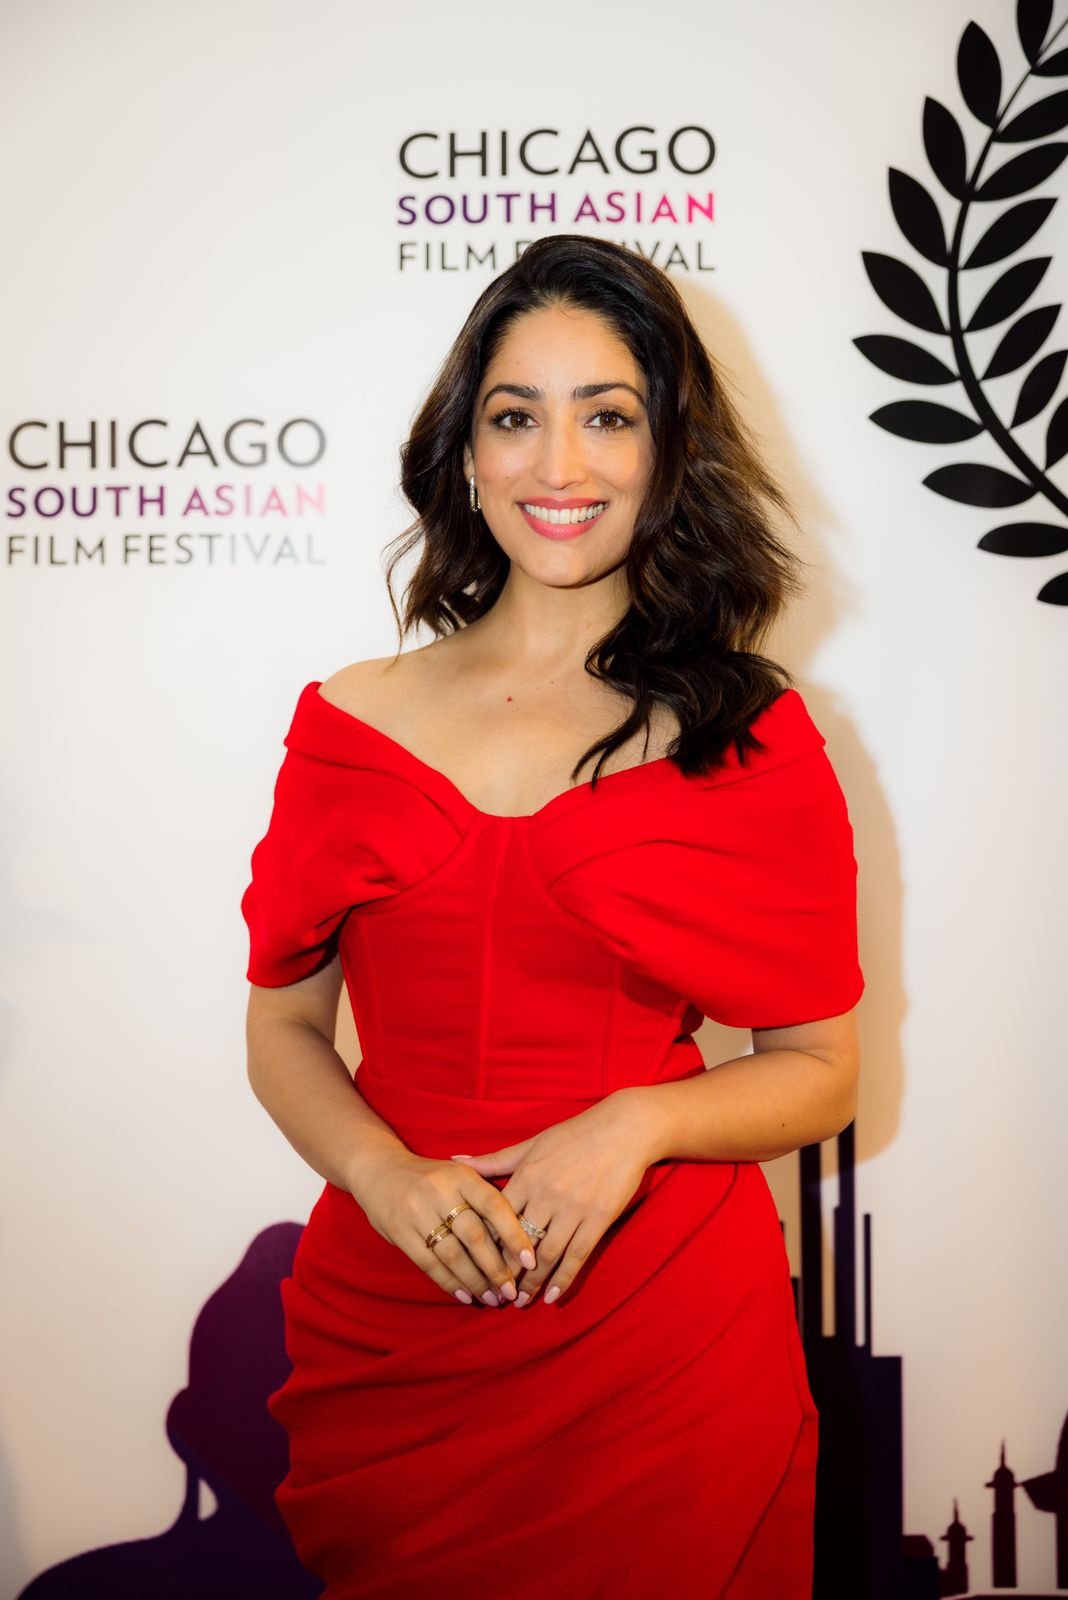 You are currently viewing ZEE Studios and Namah Pictures’ ‘LOST’ opened to great admiration at the Chicago South Asian Film Festival.